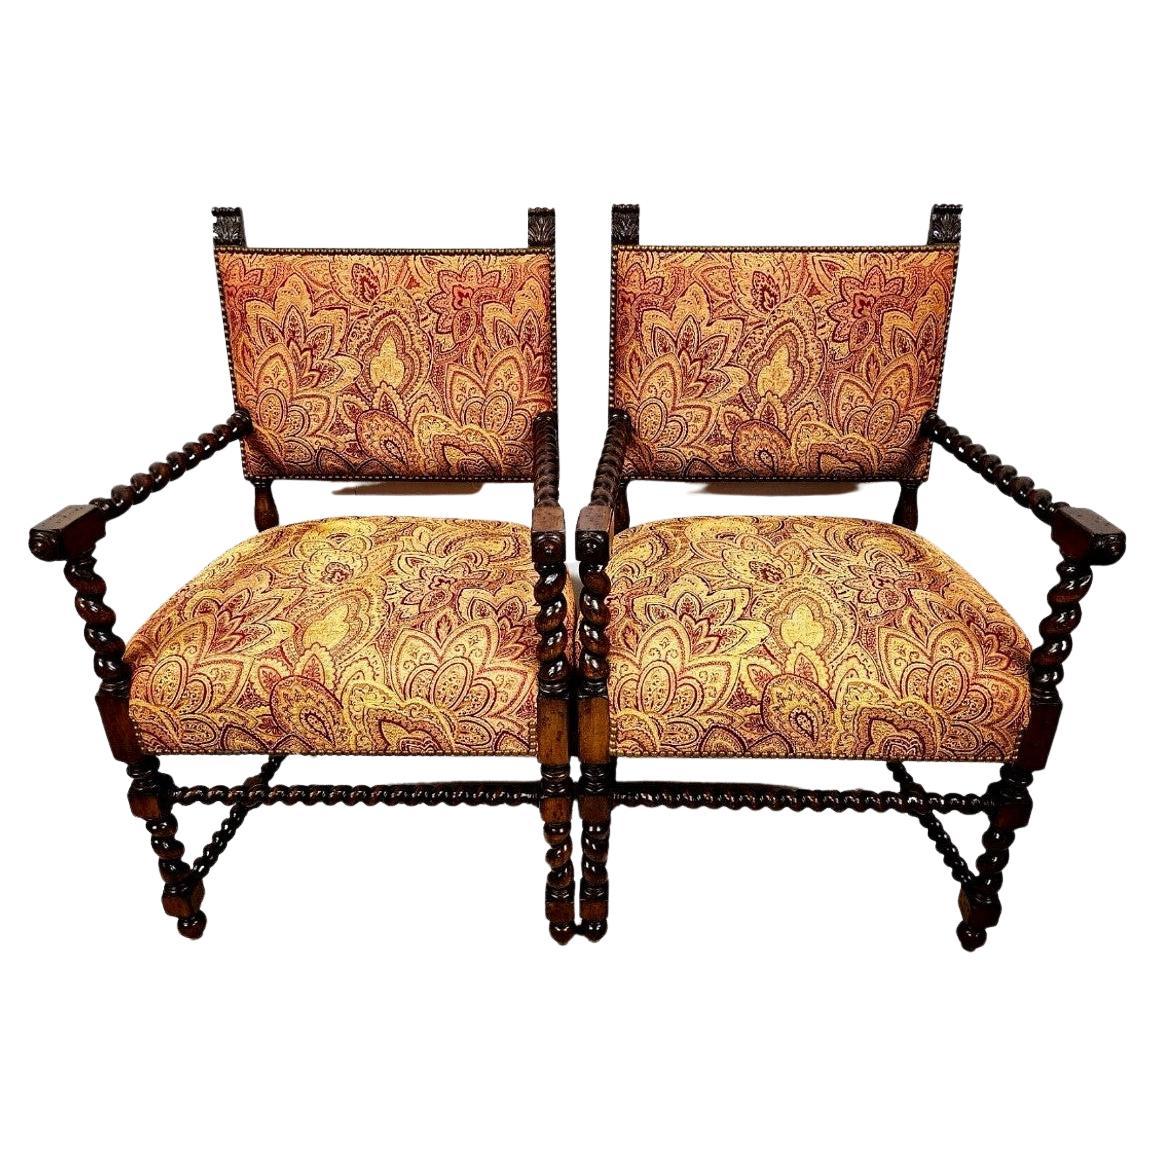 Spanish Revival Armchairs Antique Set of 2